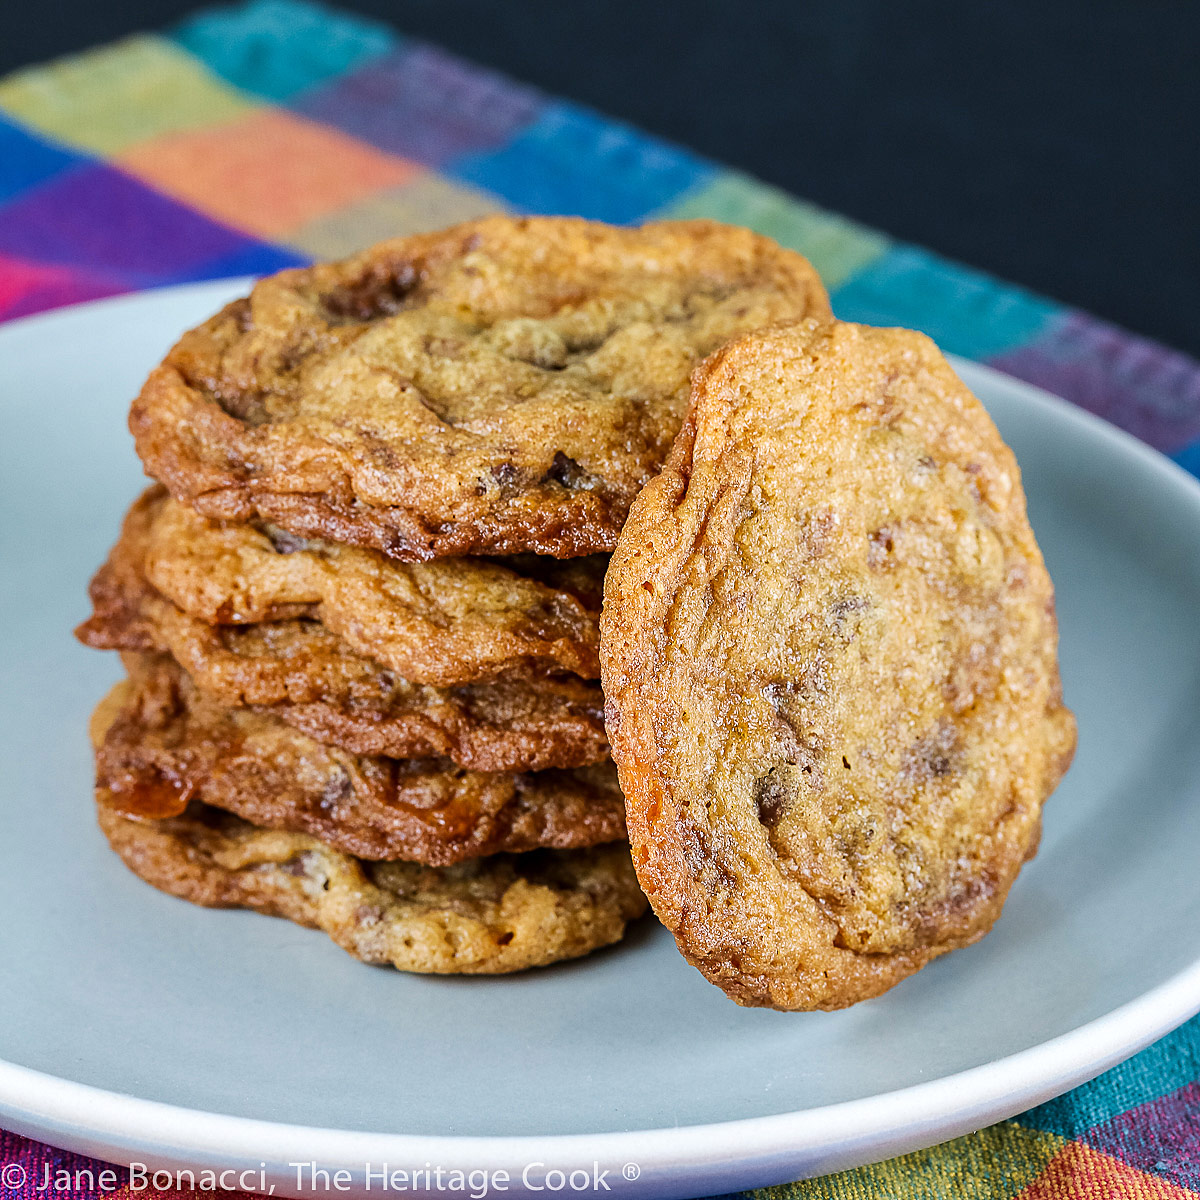 Somewhat lumpy cookies that look like chocolate chip but have Butterfinger candies in them too; Butterfinger Chocolate Chip Cookies © 2022 Jane Bonacci, The Heritage Cook.